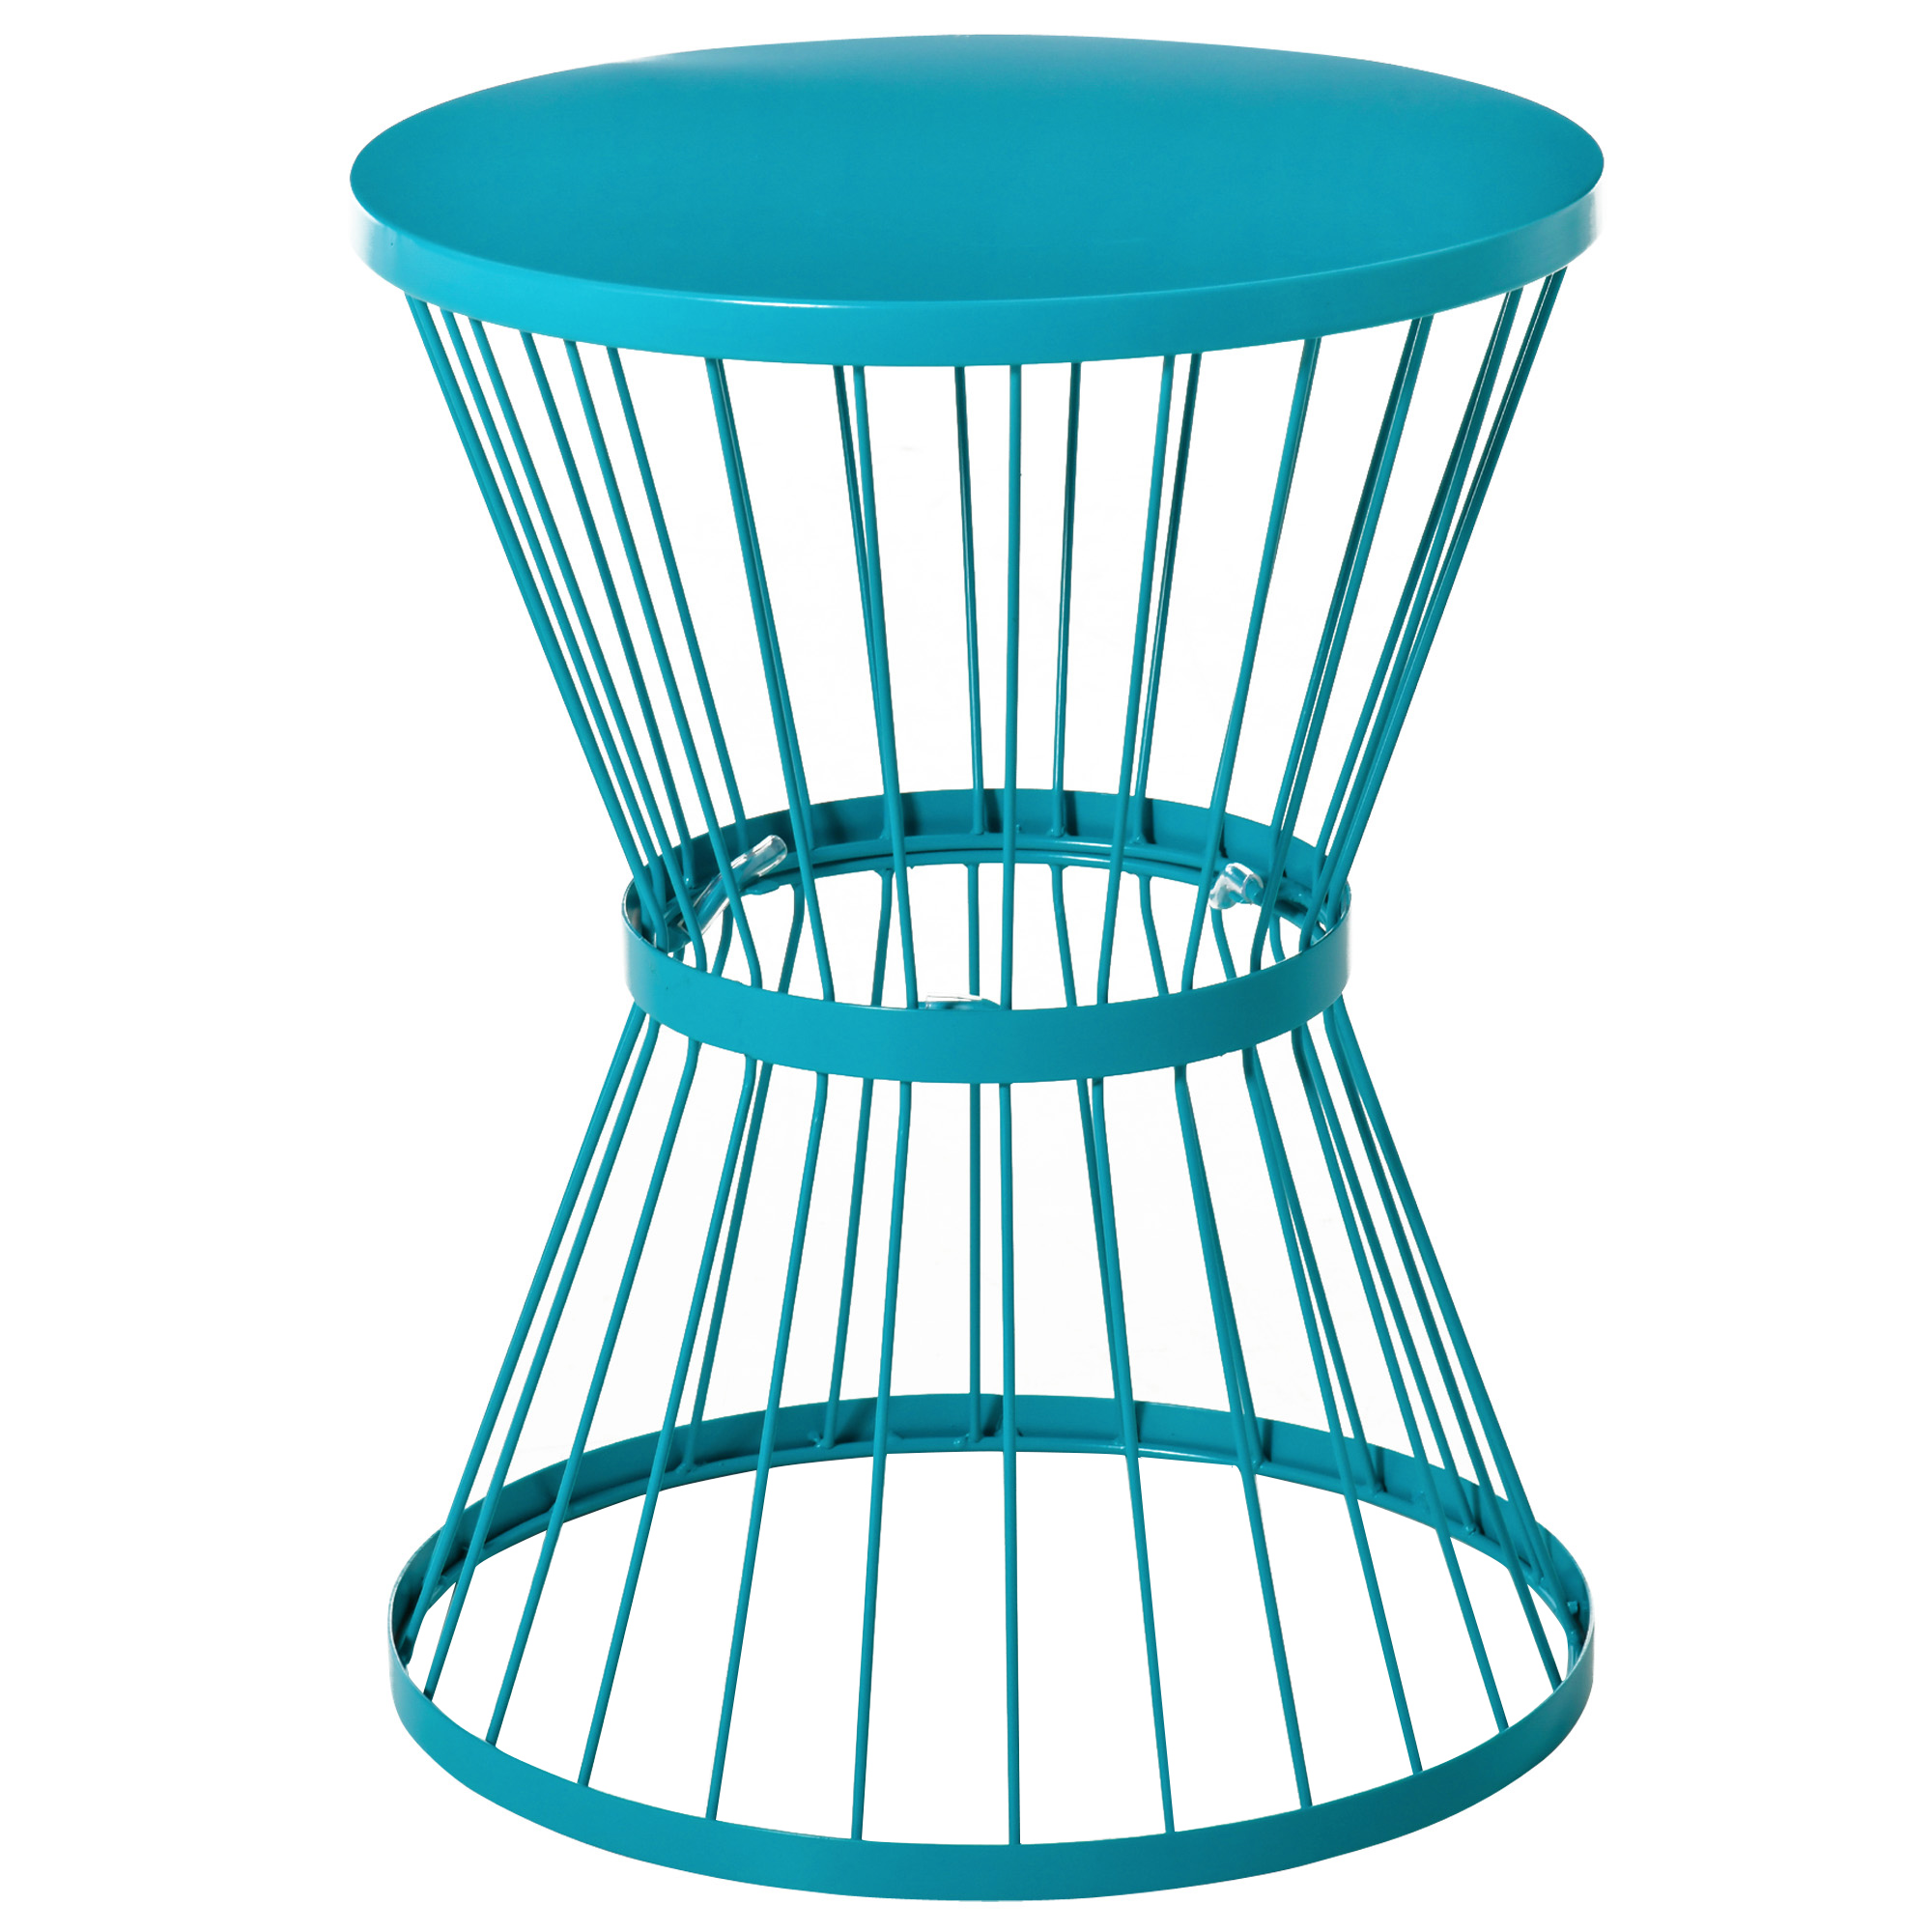 Outsunny 16" Outdoor & Indoor Garden Steel Accent Table w/ Hourglass Design, Blue